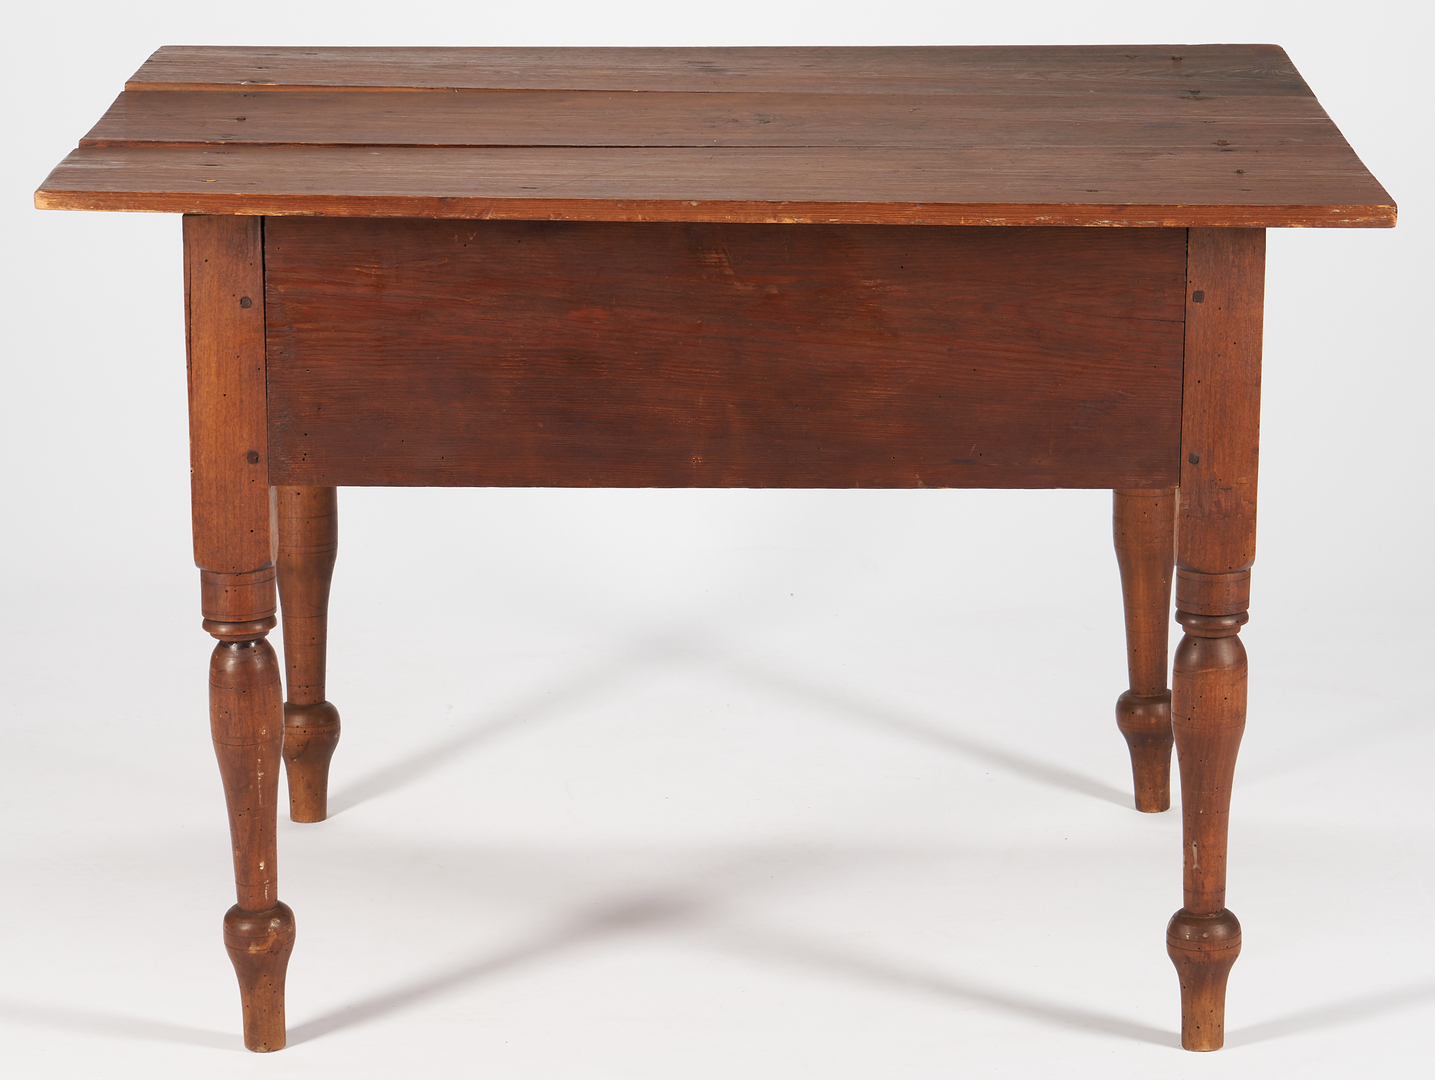 Lot 1038: Southern Vernacular Turned Leg Low Table